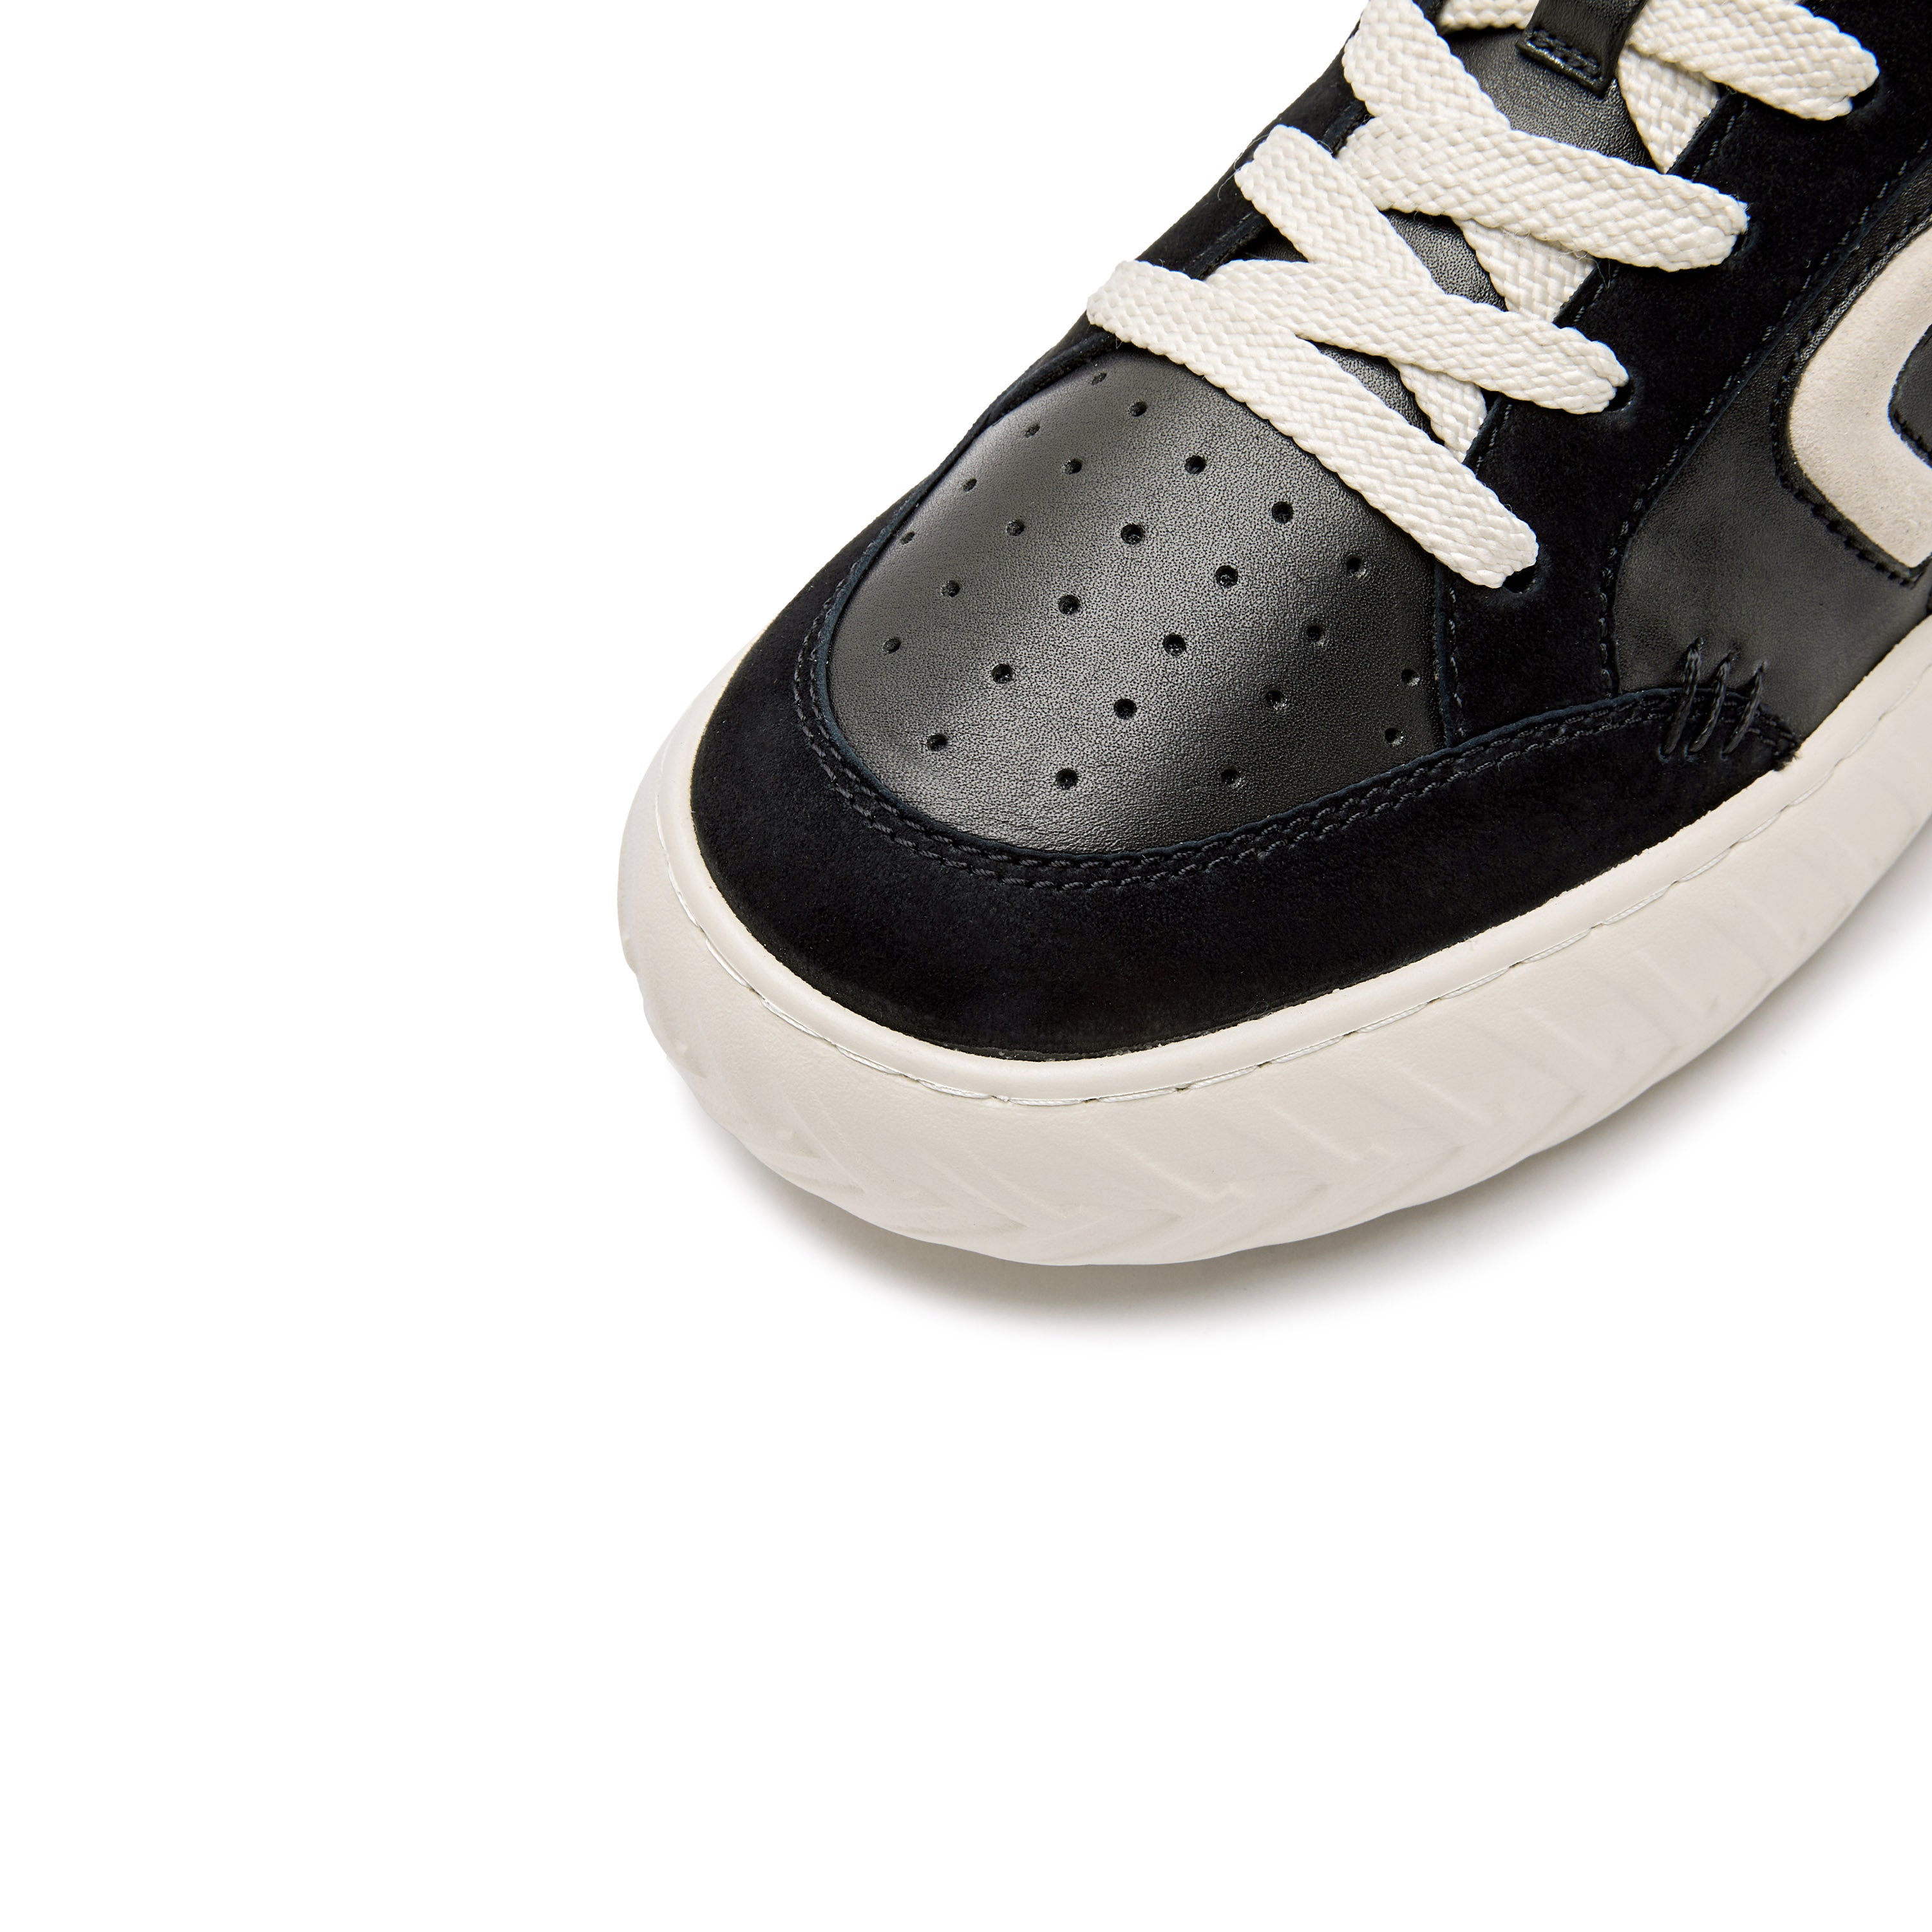 Black Wheel Platfrom Leather Sneakers